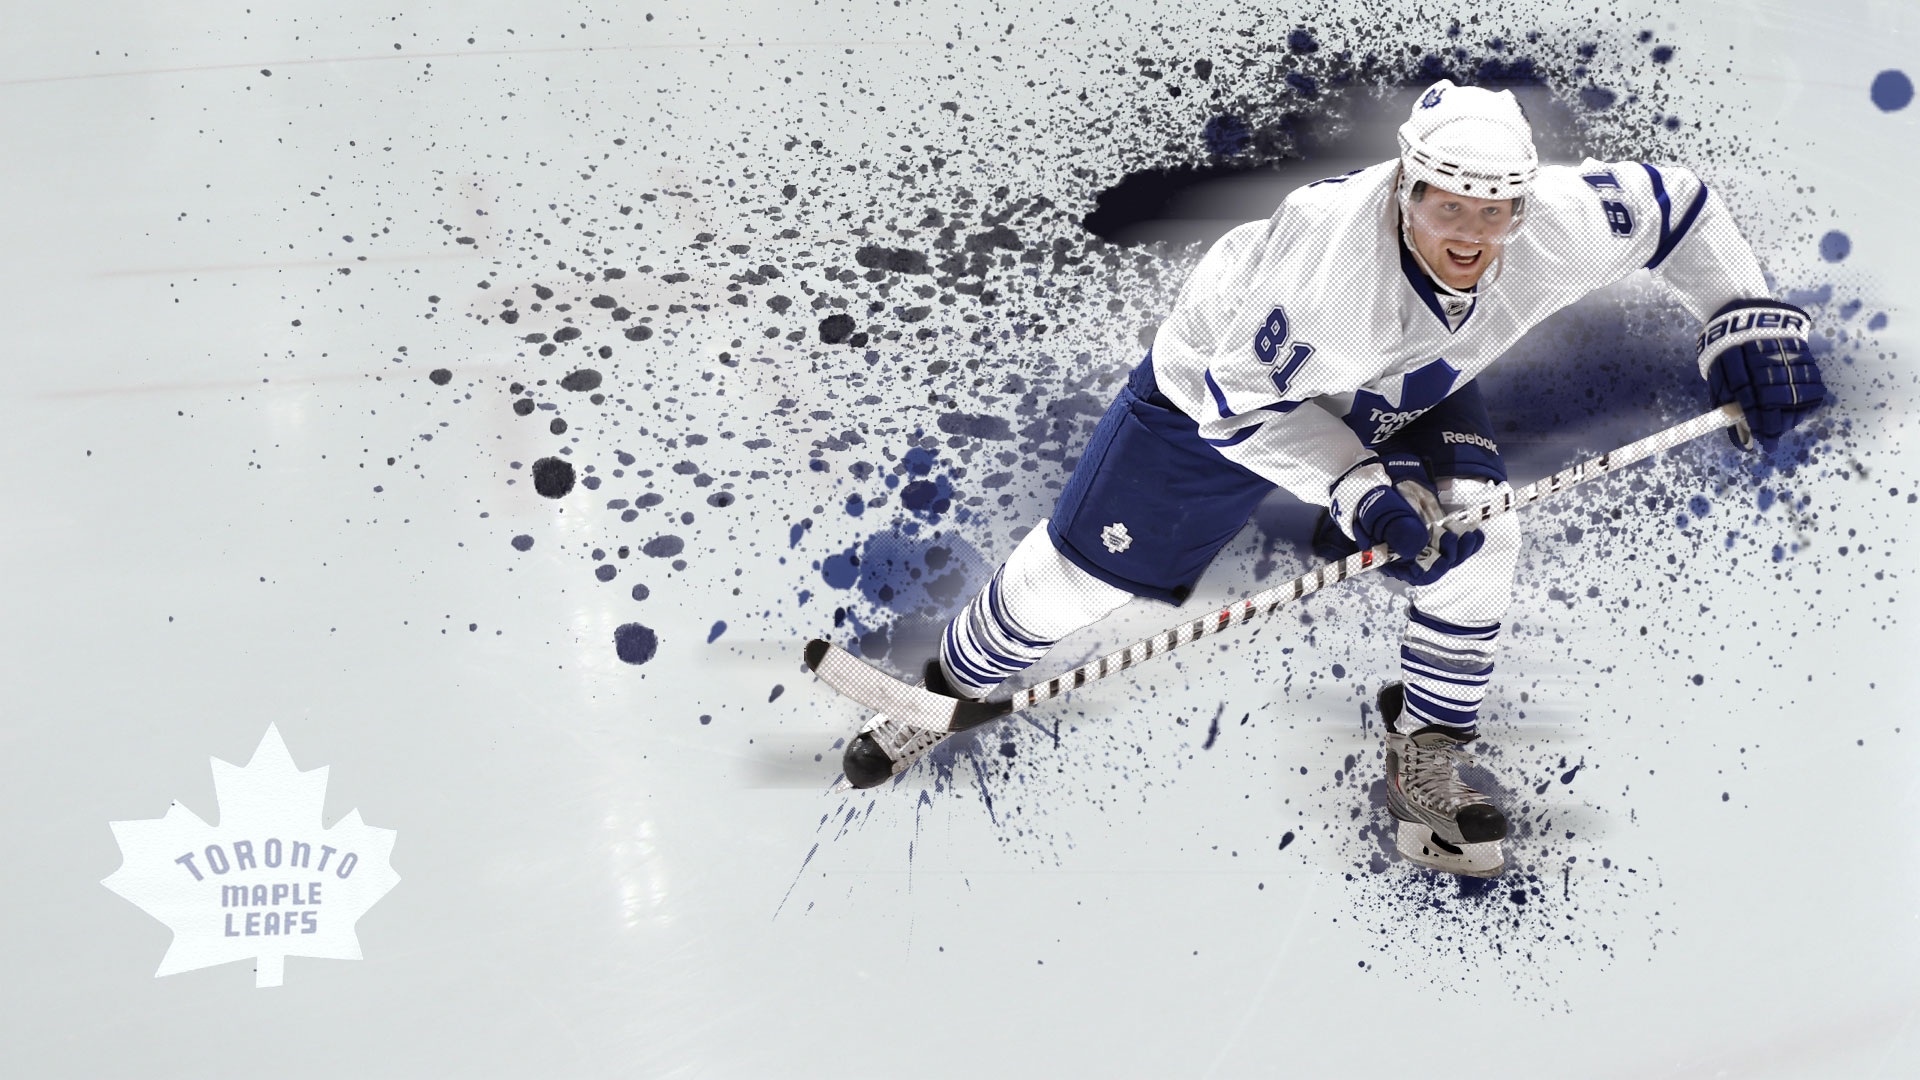 NHL Wallpapers and Backgrounds - WallpaperSafari